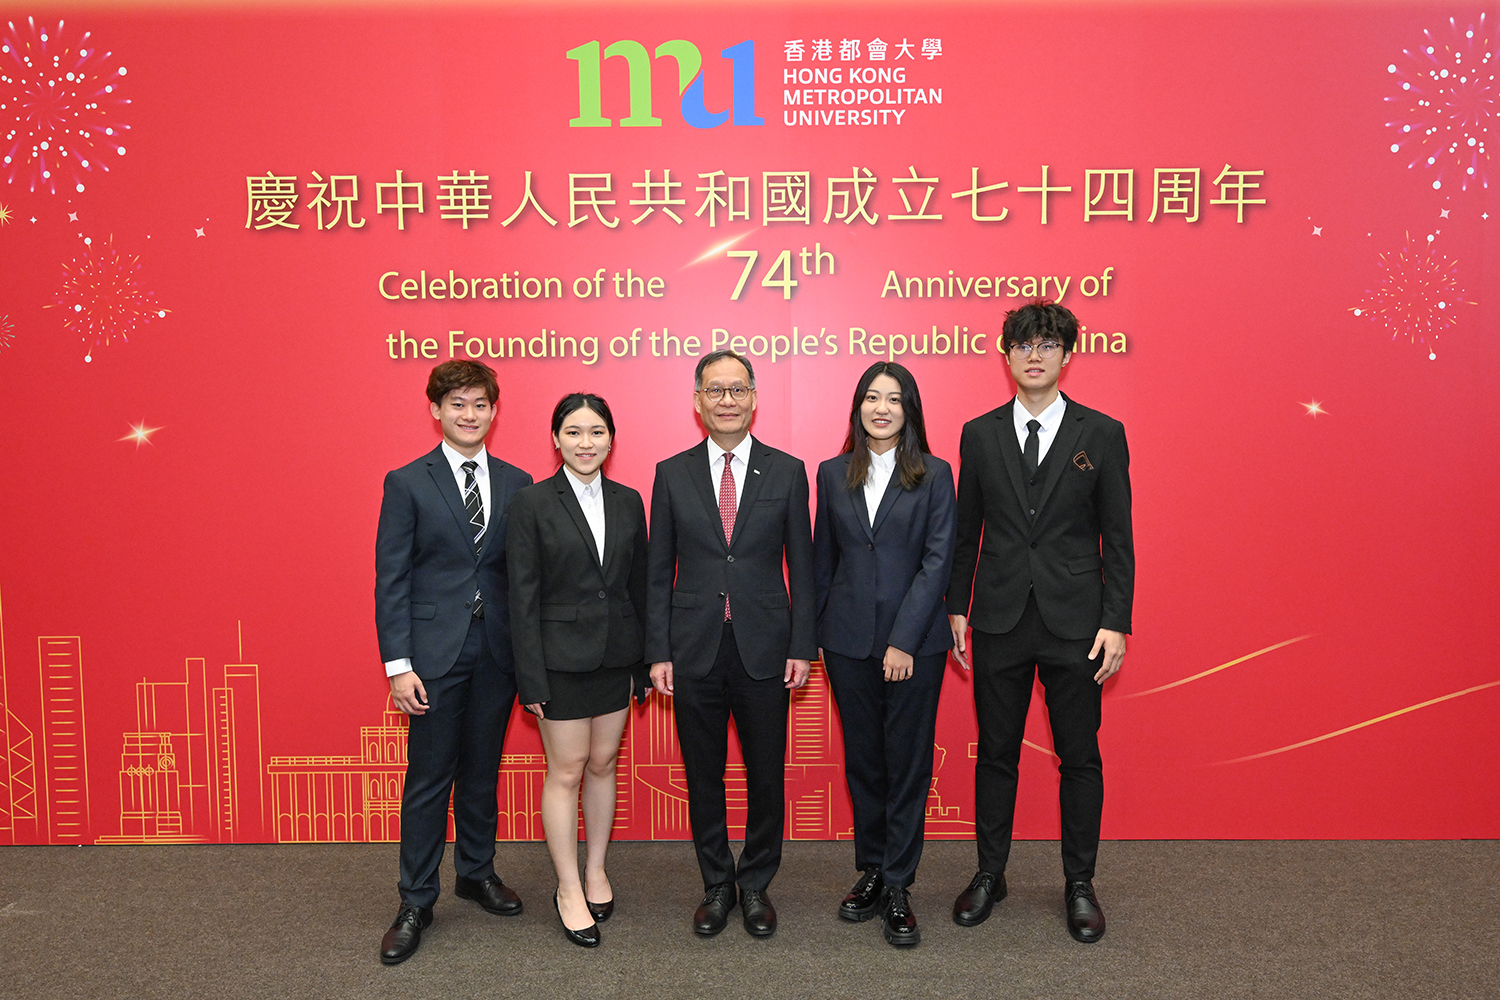 HKMU students express their excitement about participating in the National Day flag-raising ceremony. HKMU President Prof. Paul Lam Kwan-sing (middle) poses with (from left) local students Marcelino Cheung Ho-chai and Lai Yan-yu and mainland students Xie Ruoshui and Qiu Yancong at the ceremony.